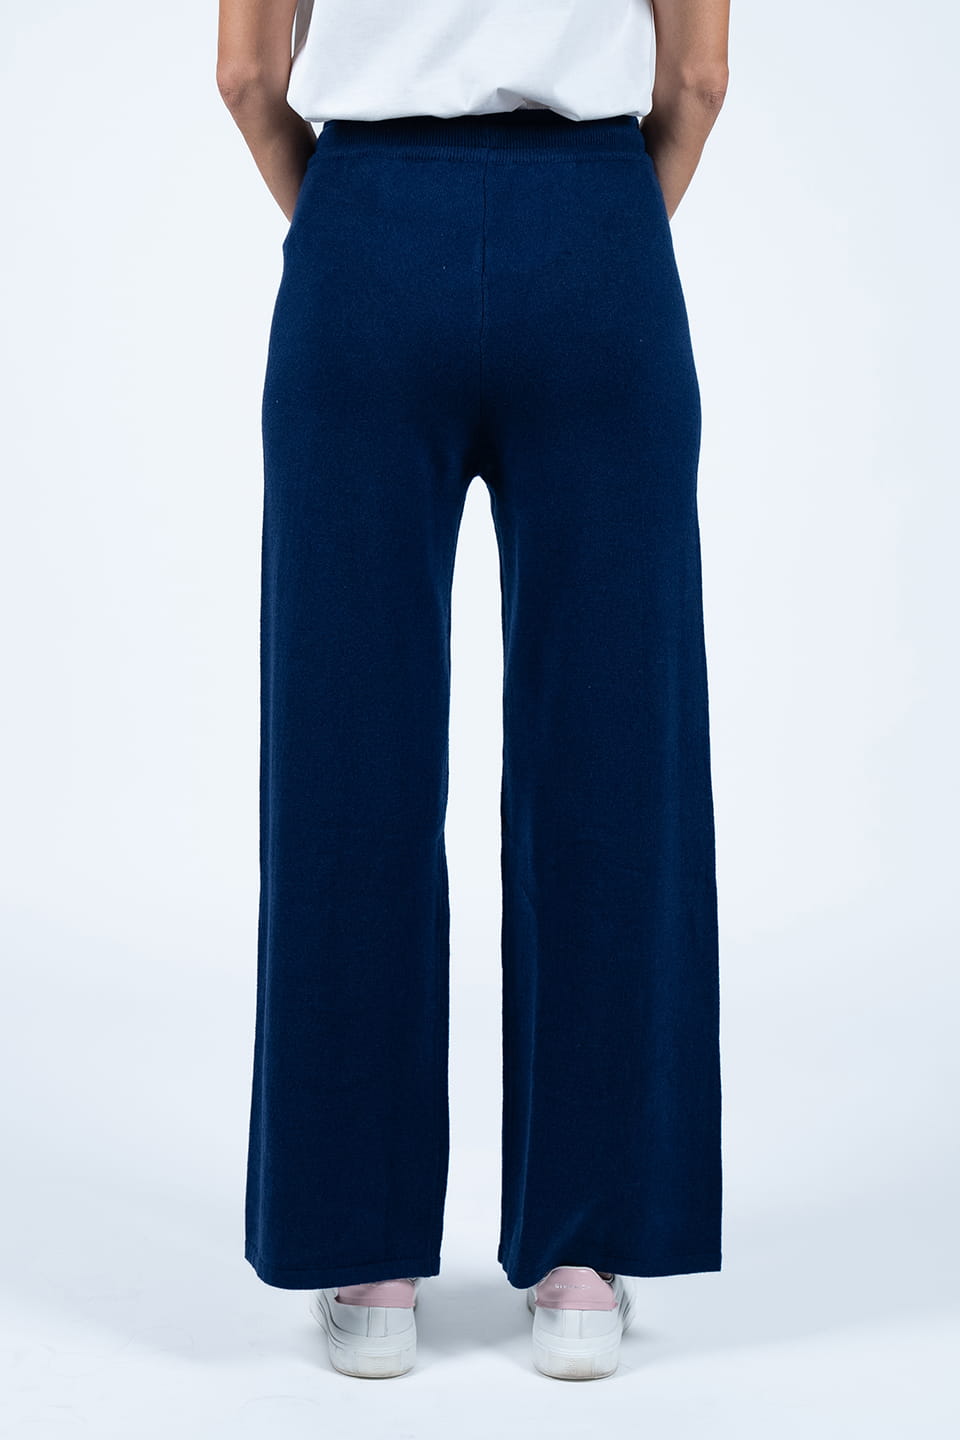 Designer Blue Women pants, shop online with free delivery in UAE. Product gallery 4